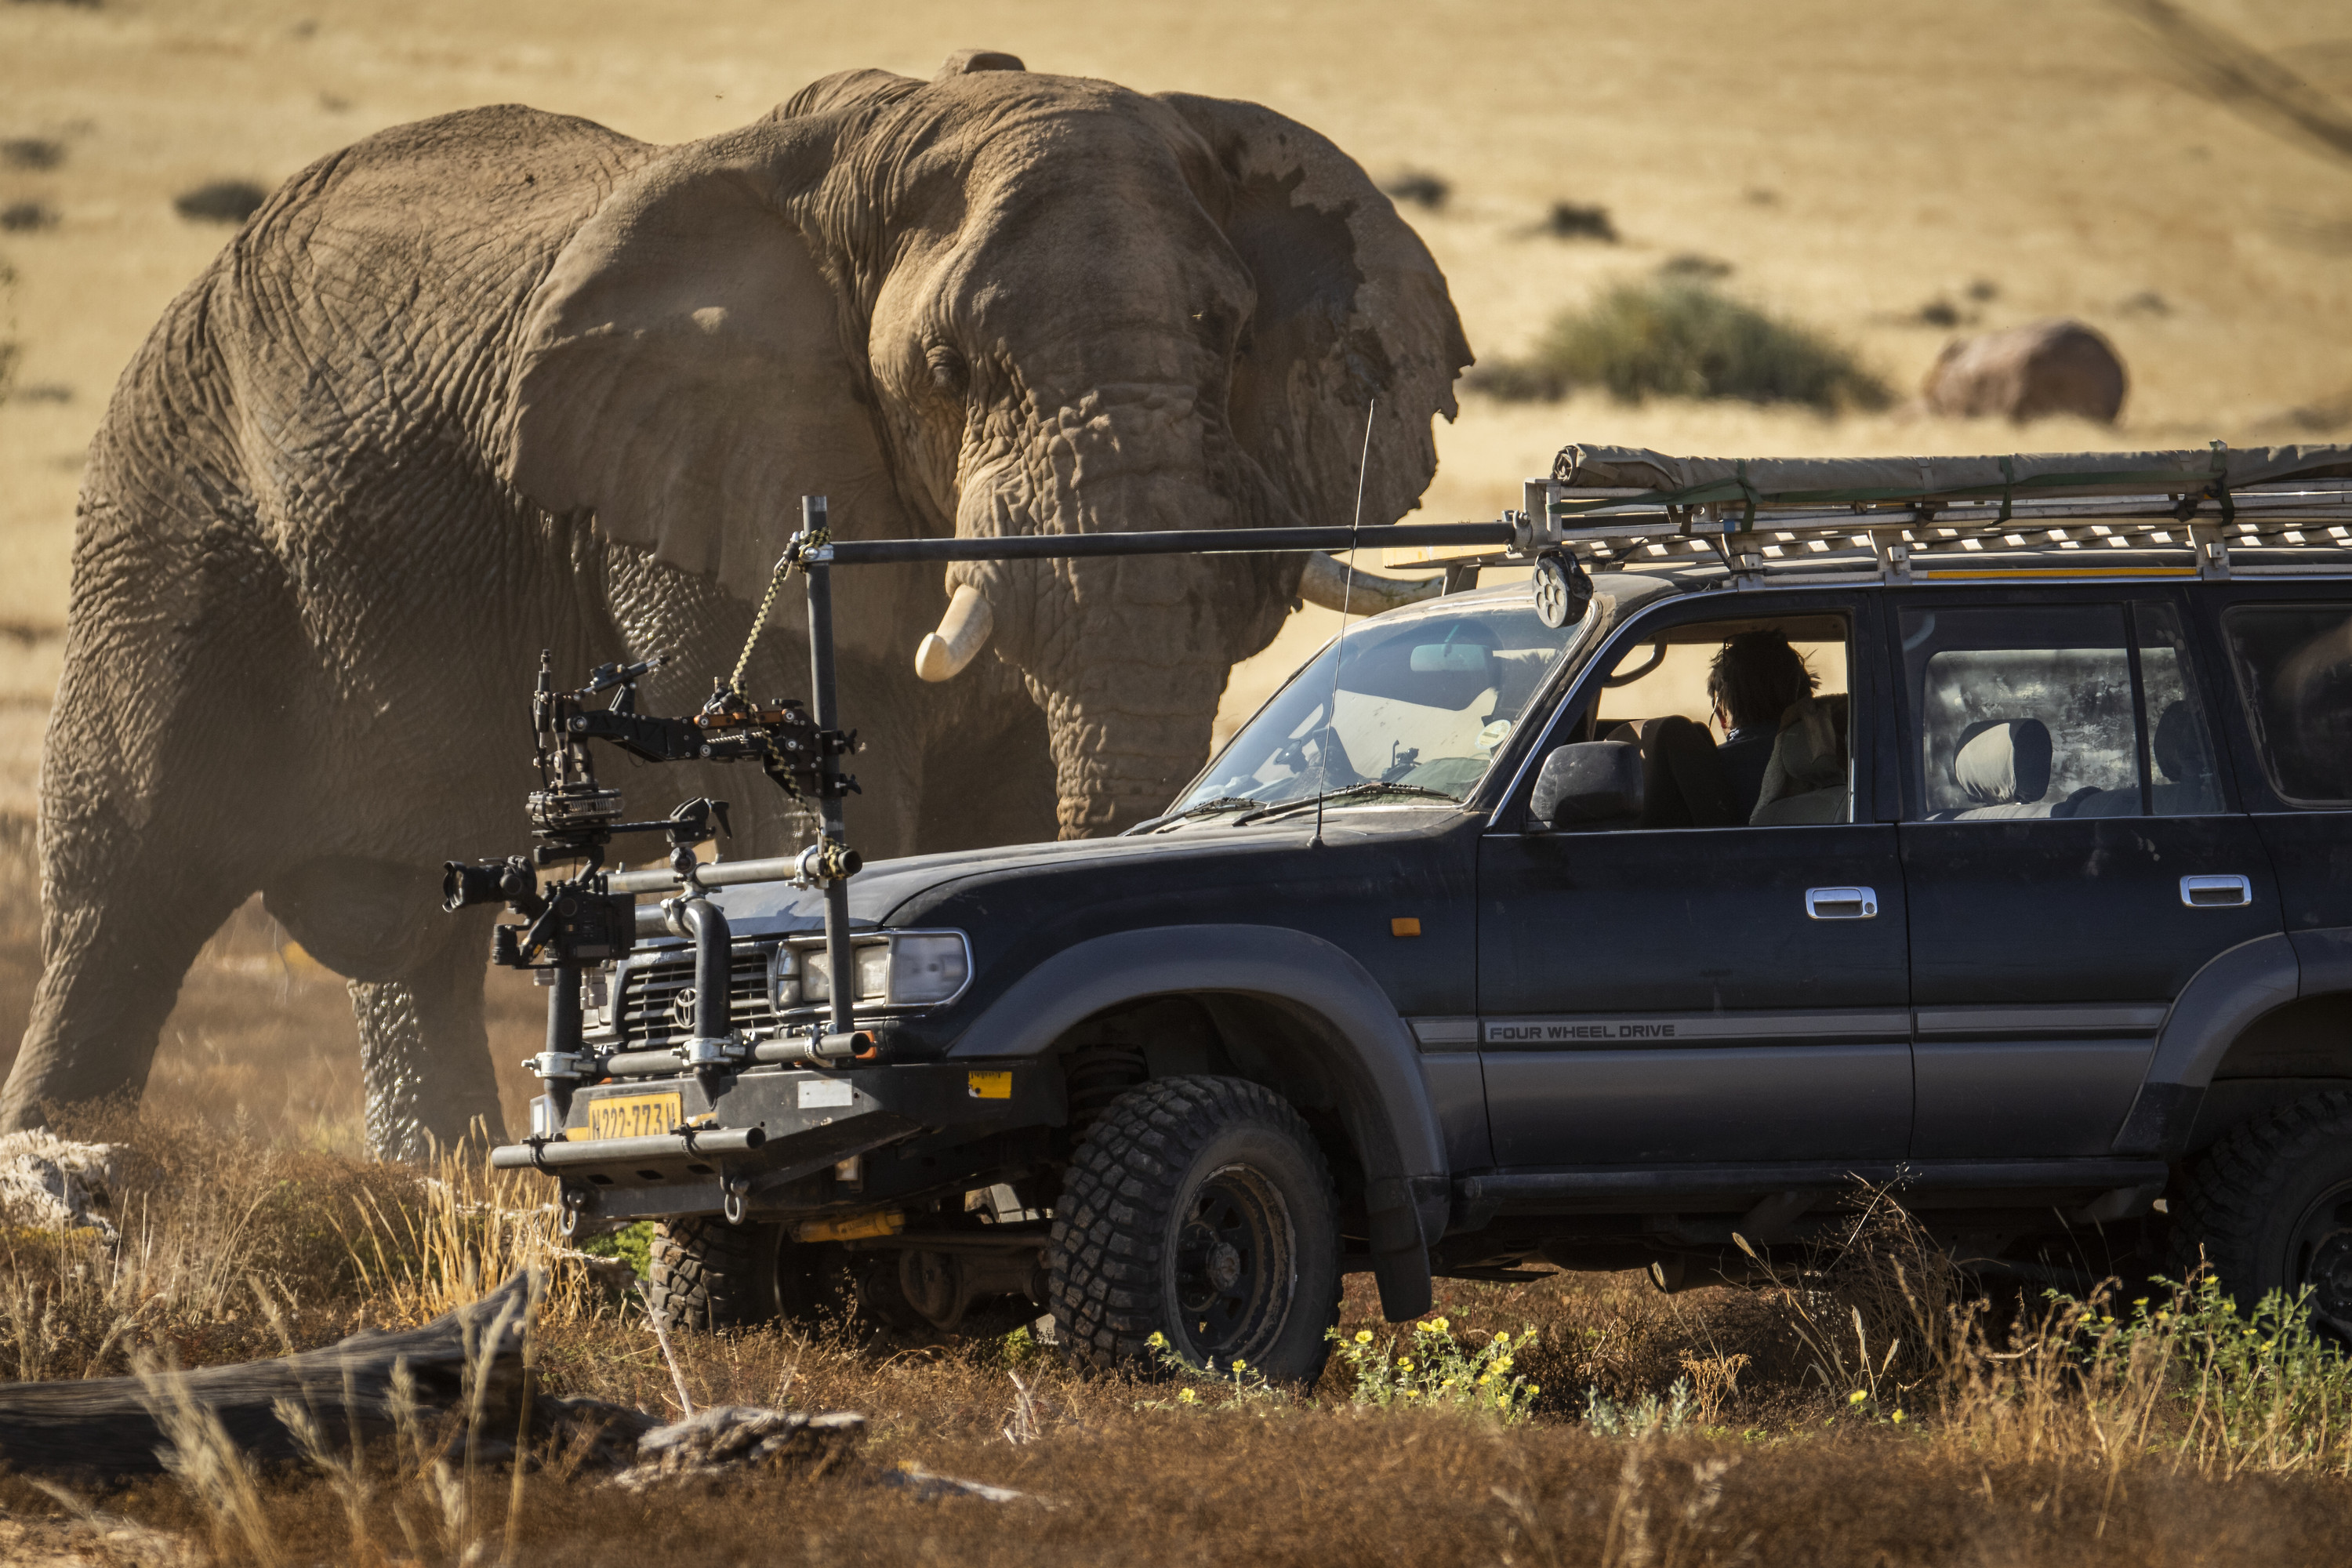 An elephant gets up close and personal with a vehicle.